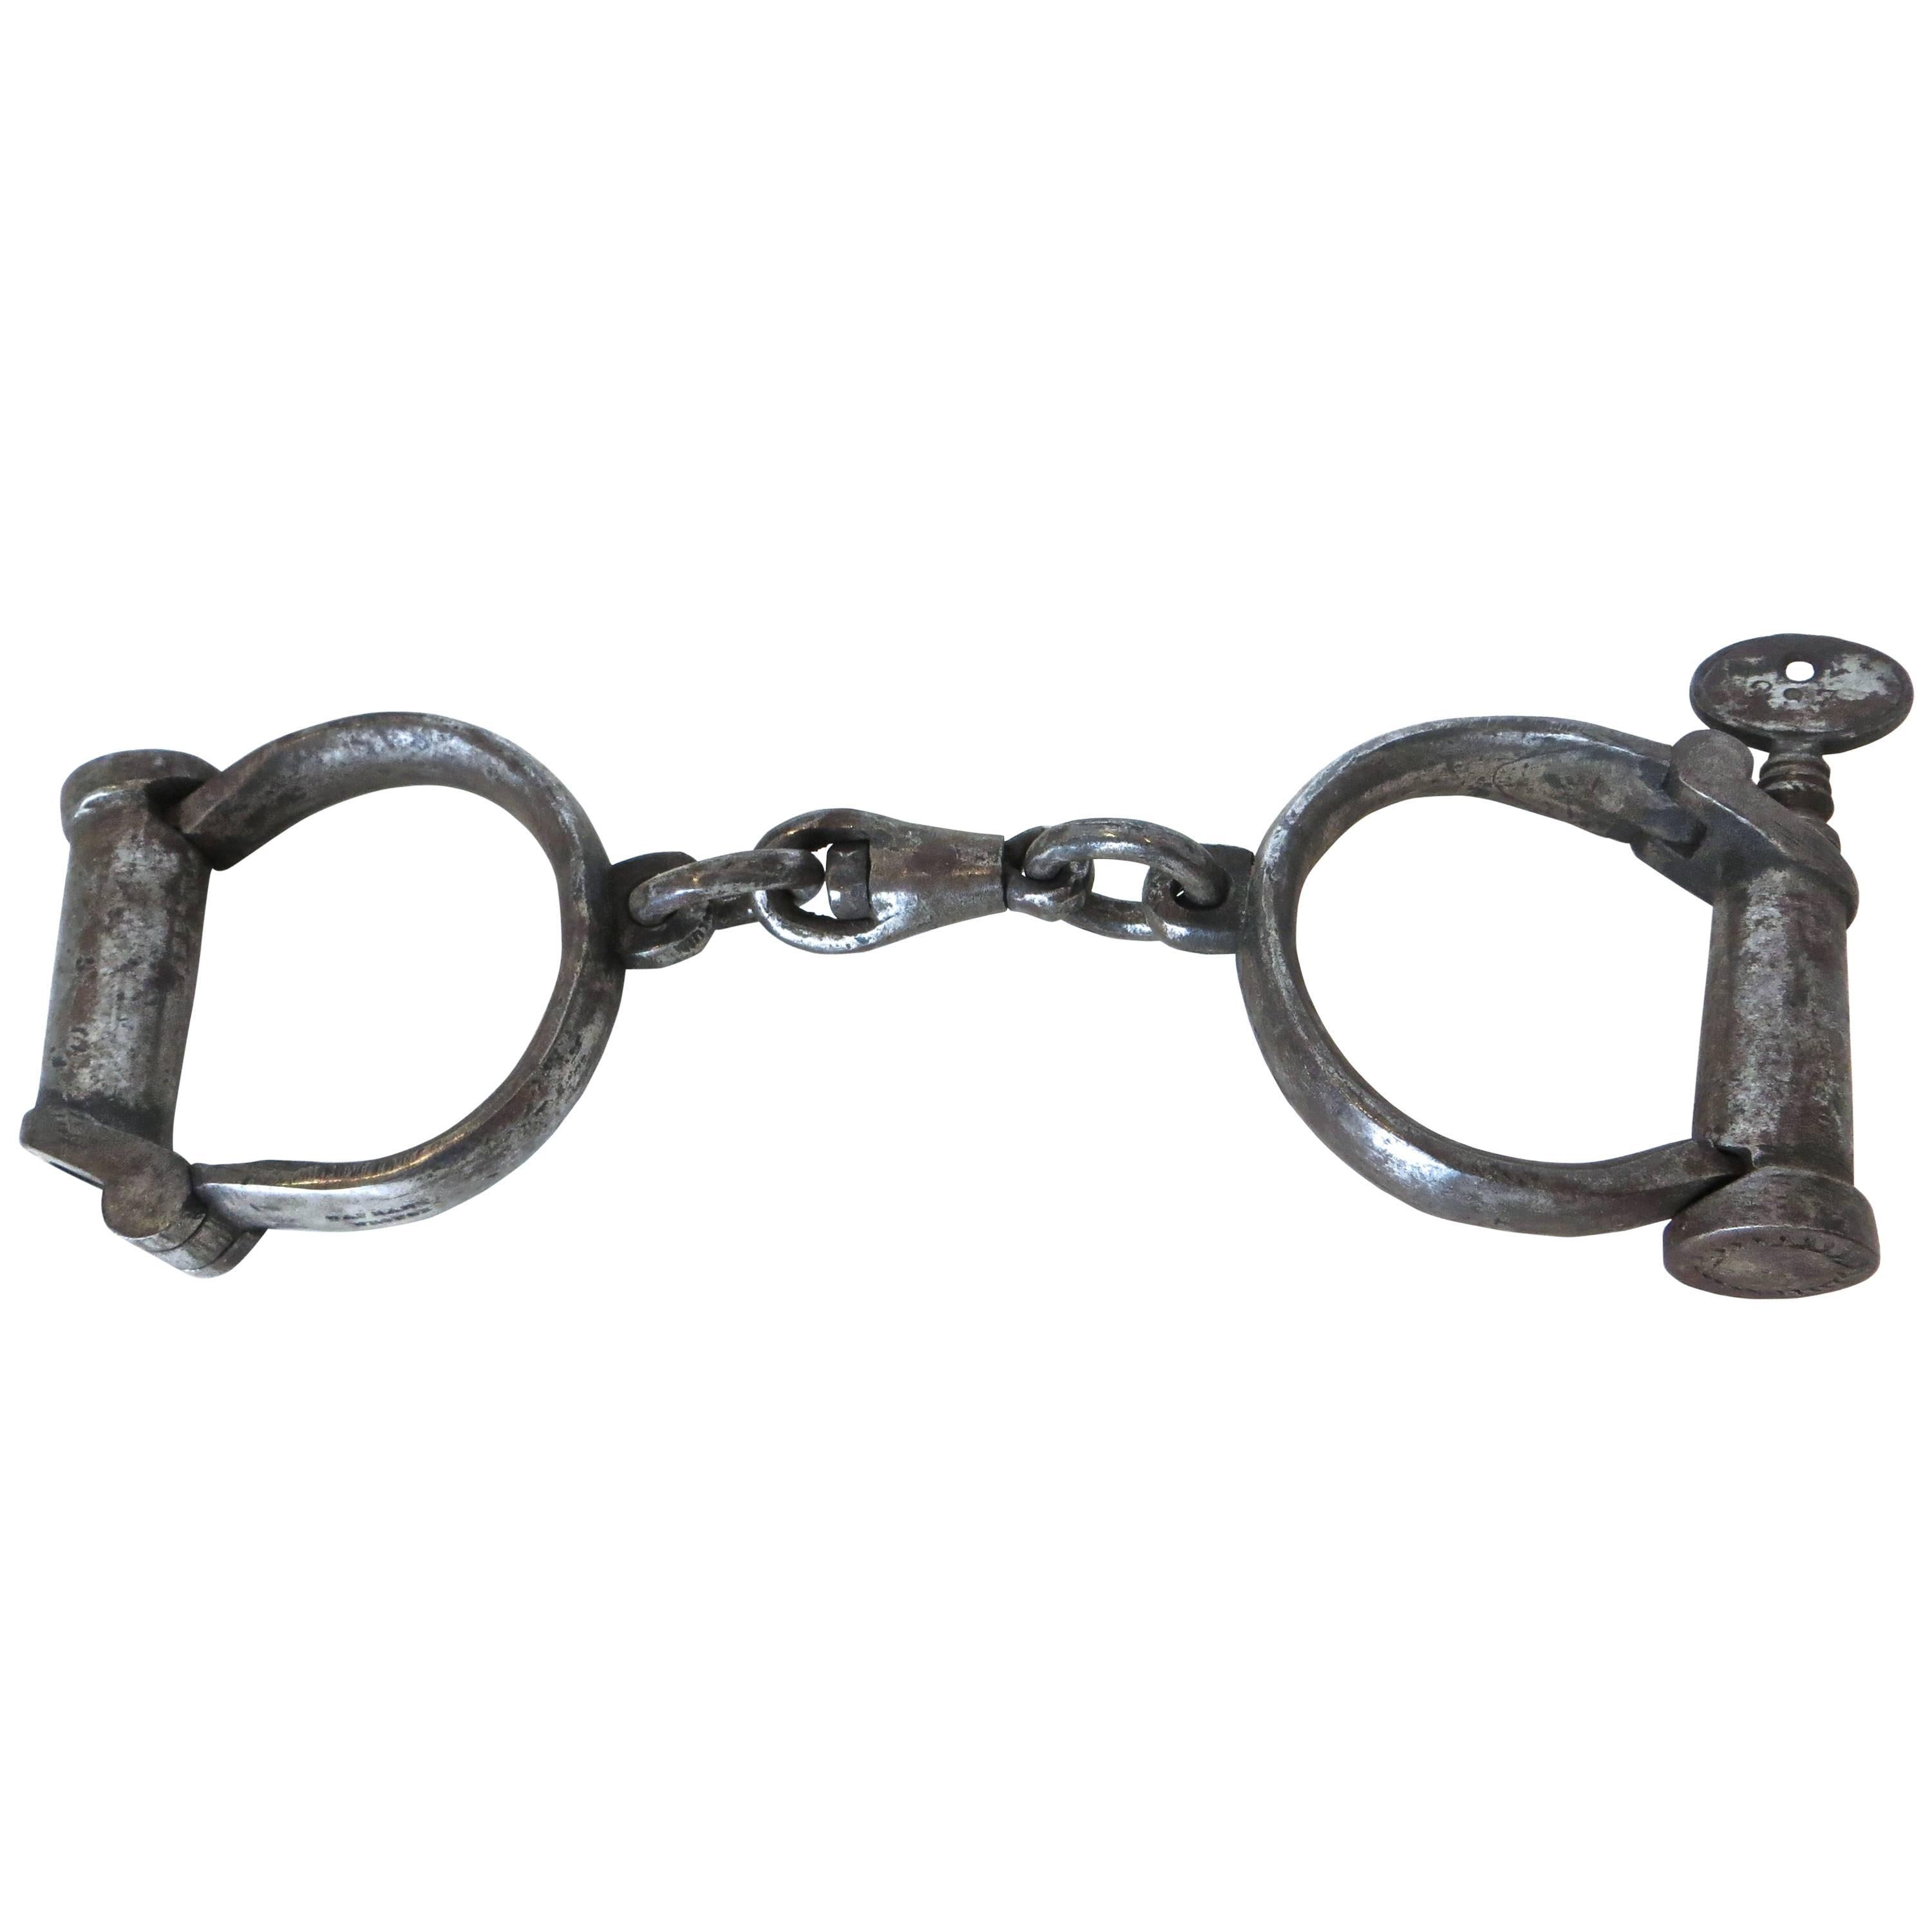 Handcuffs by Hiatt, England 'Prop from Magician' Labeled#297, circa 1870